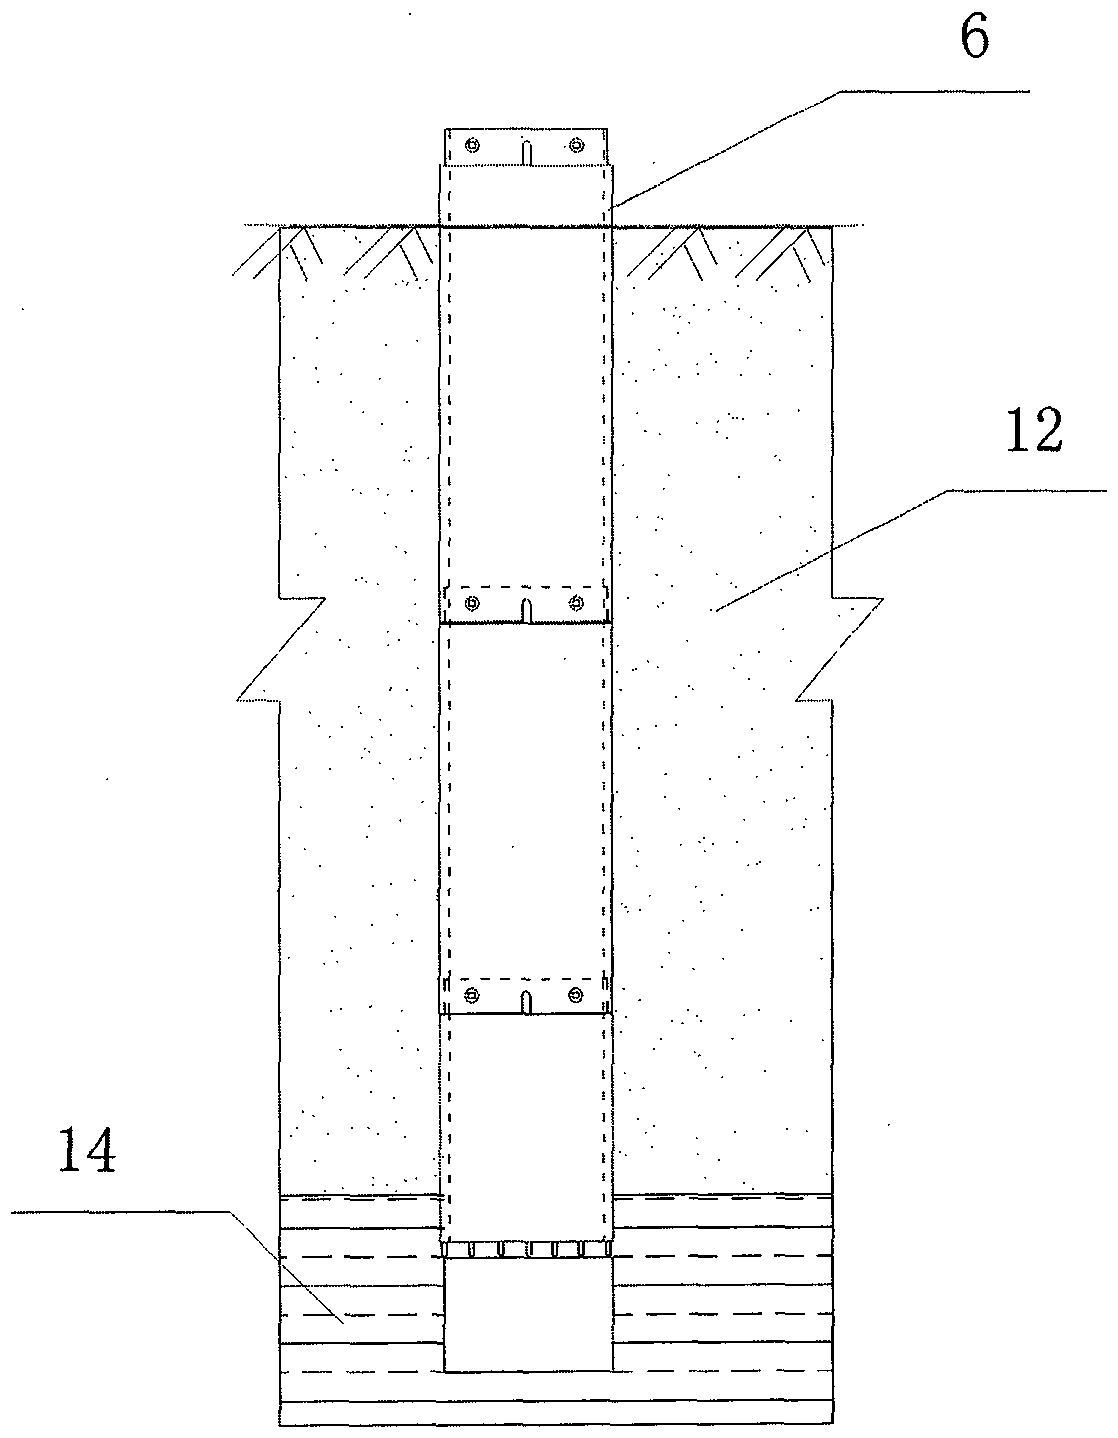 Bridge pile foundation rotary drilling rig cutting type full casing follow-up pile construction method and system